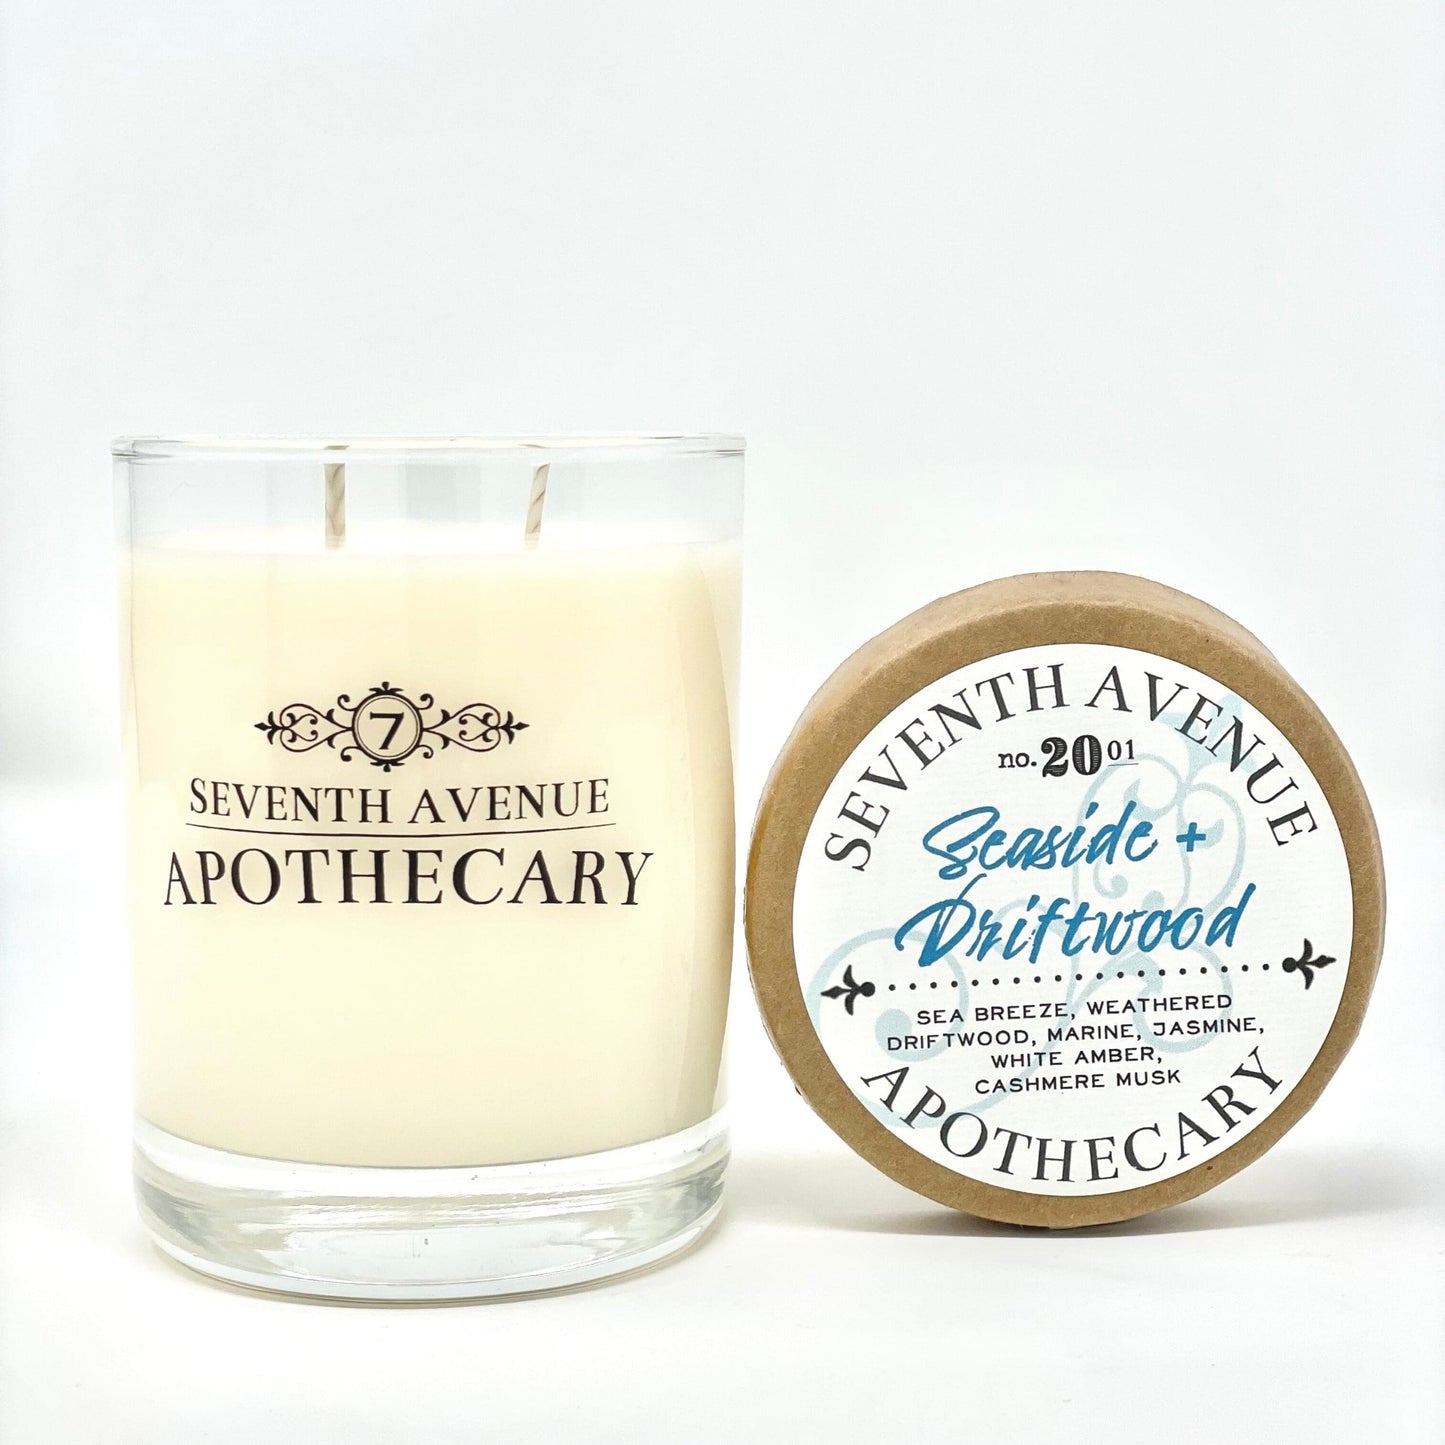 Seaside + Driftwood Soy Wax Candle - Signature Glass